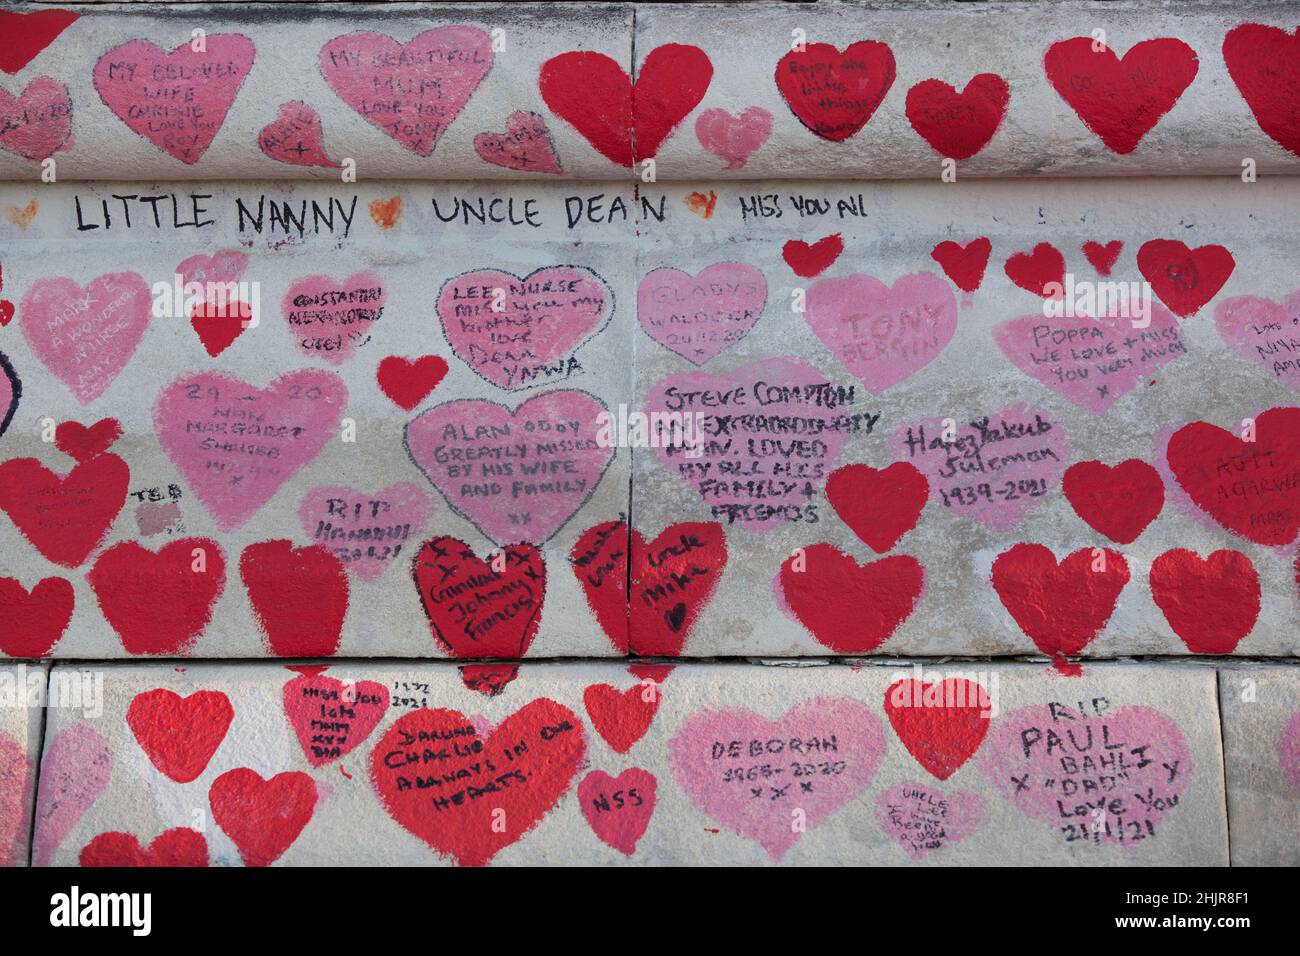 London, UK, 31 January 2022: The National Covid Memorial Wall, on the south bank of the River Thames, in which each person who has died in the pandemic is represented by a red heart, is an important site for bereaved families who lost loved ones. The memorial is directly opposite the Houses of Parliament where Prime Minister Boris Johnson is speaking this afternoon about the findings of the report compiled by civil servant Sue Gray about breaches of lockdown laws at 10 Downing Street during the coronavirus pandemic. Anna Watson/Alamy Live News Stock Photo